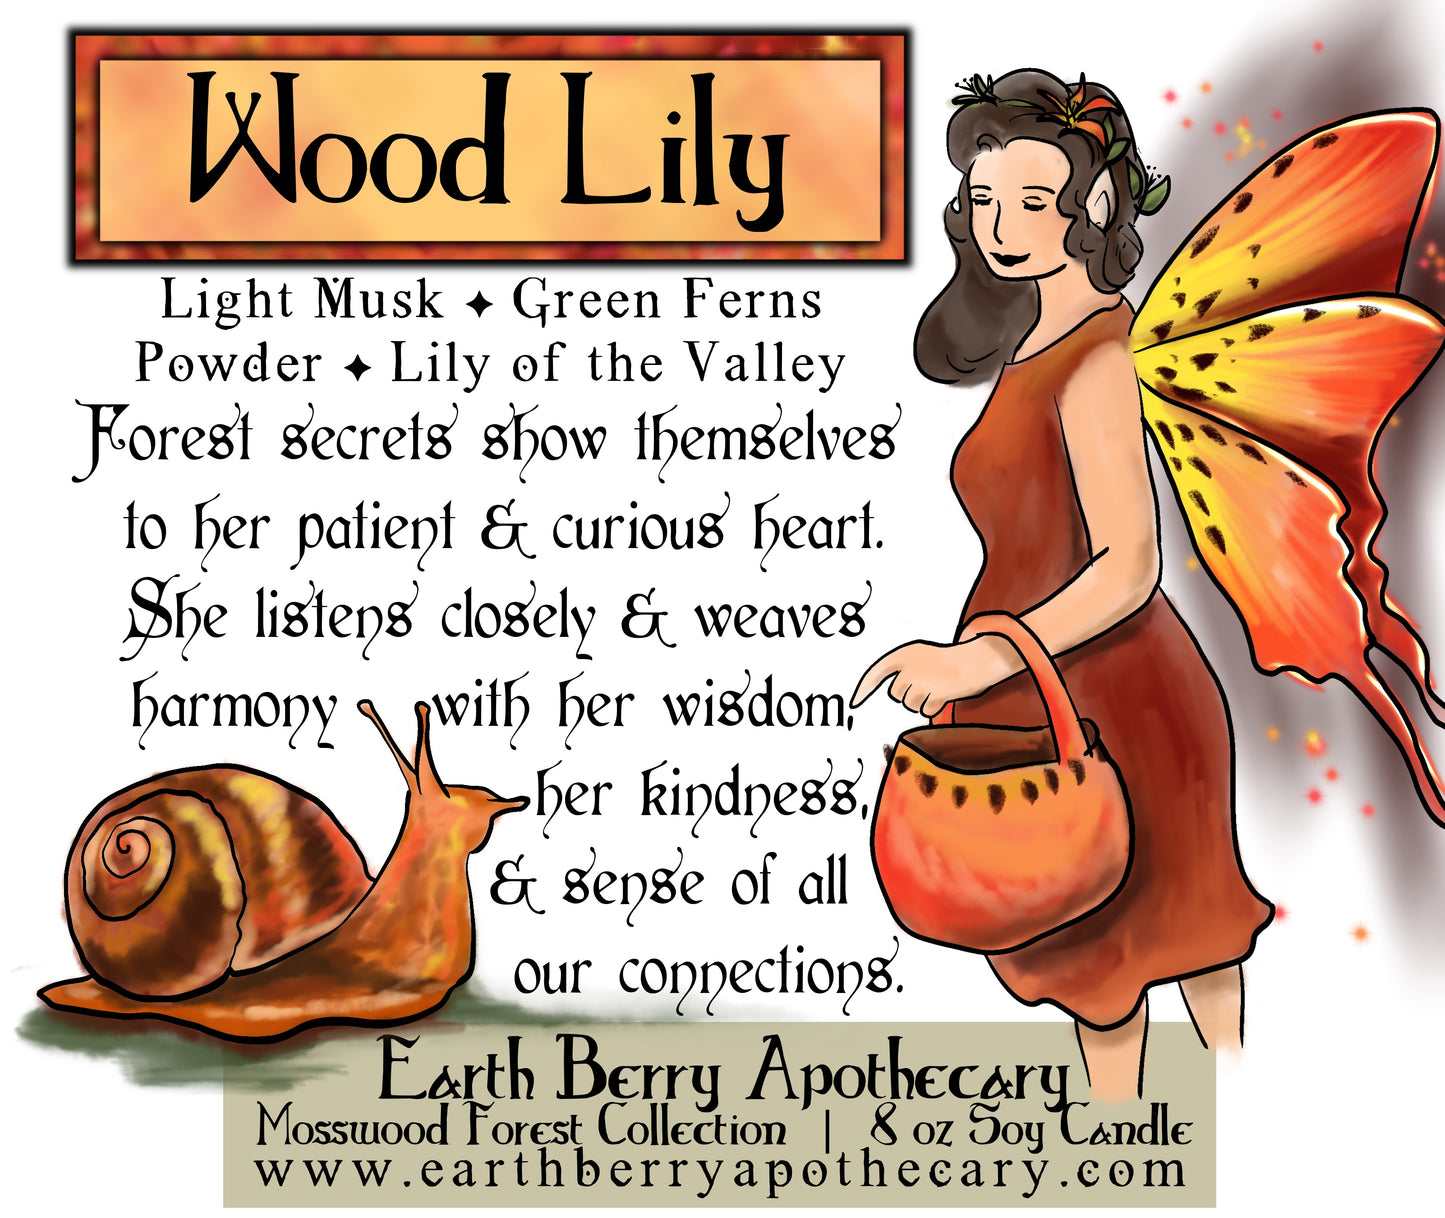 Wood lily and lily of the valley scented soy candle with a flower fairy and snail on the label